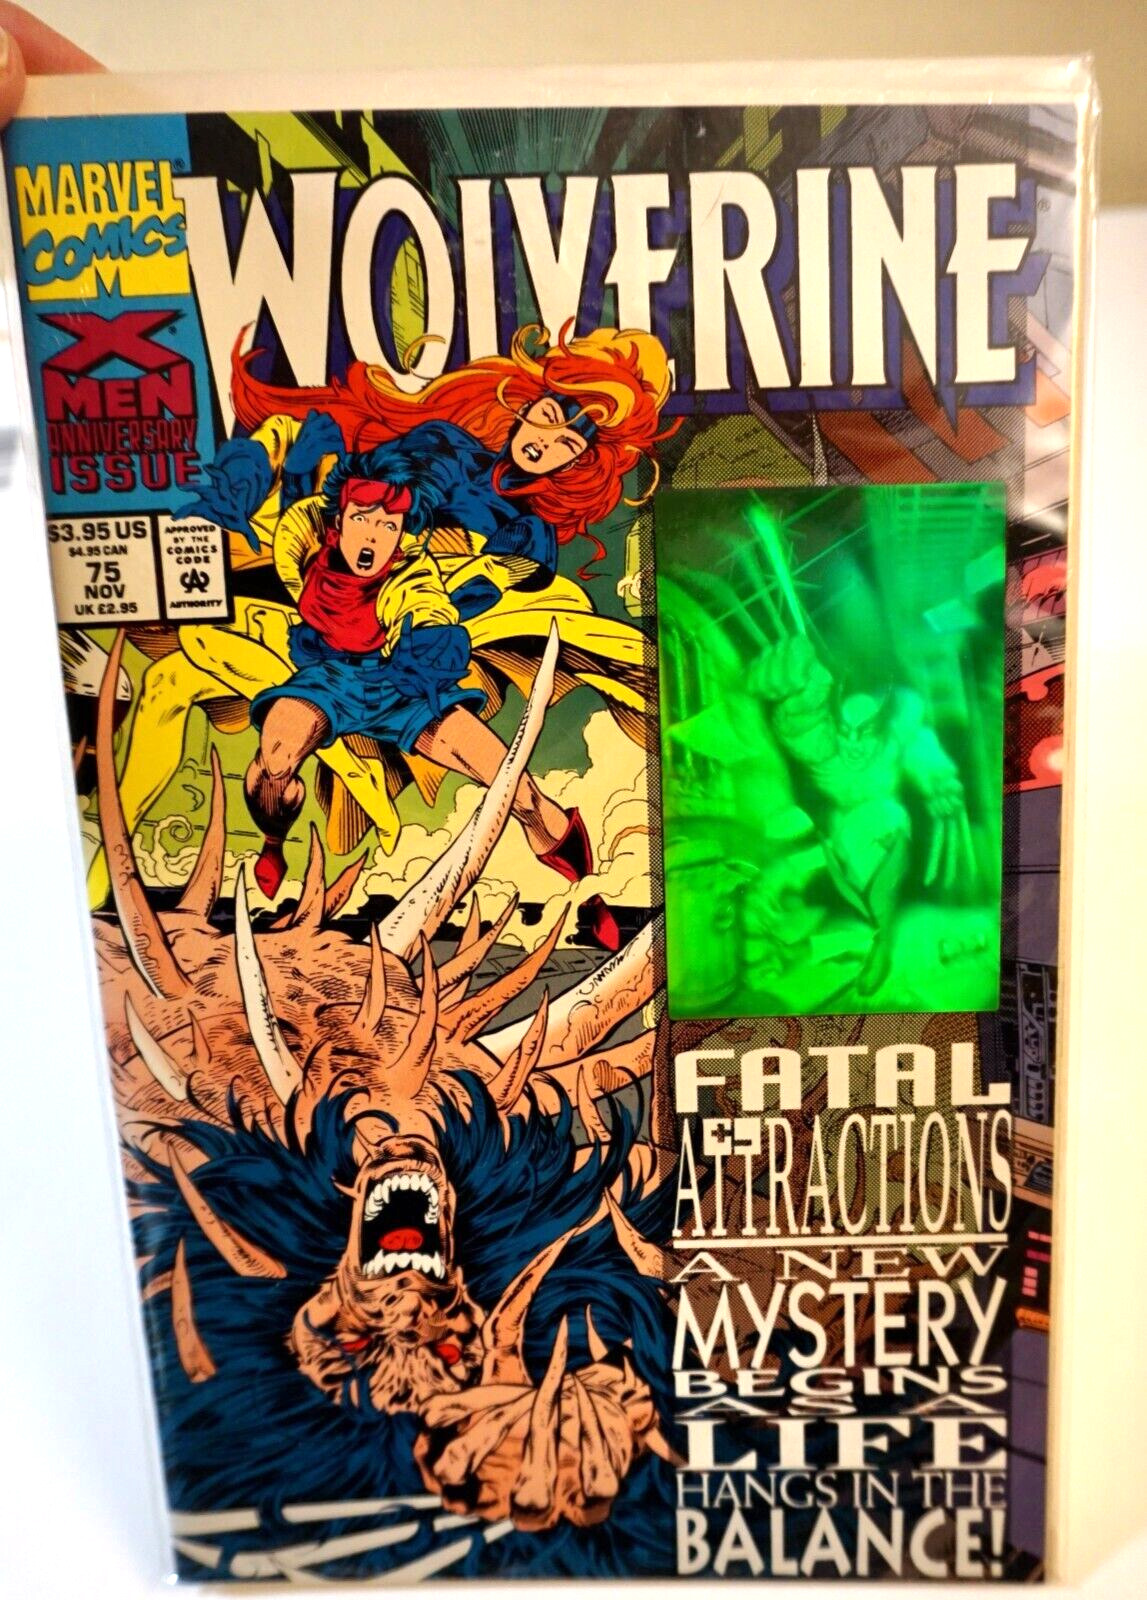 Wolverine #75 1993 Marvel Comic Book Hologram Cover Fatal Attractions Jubilee FN